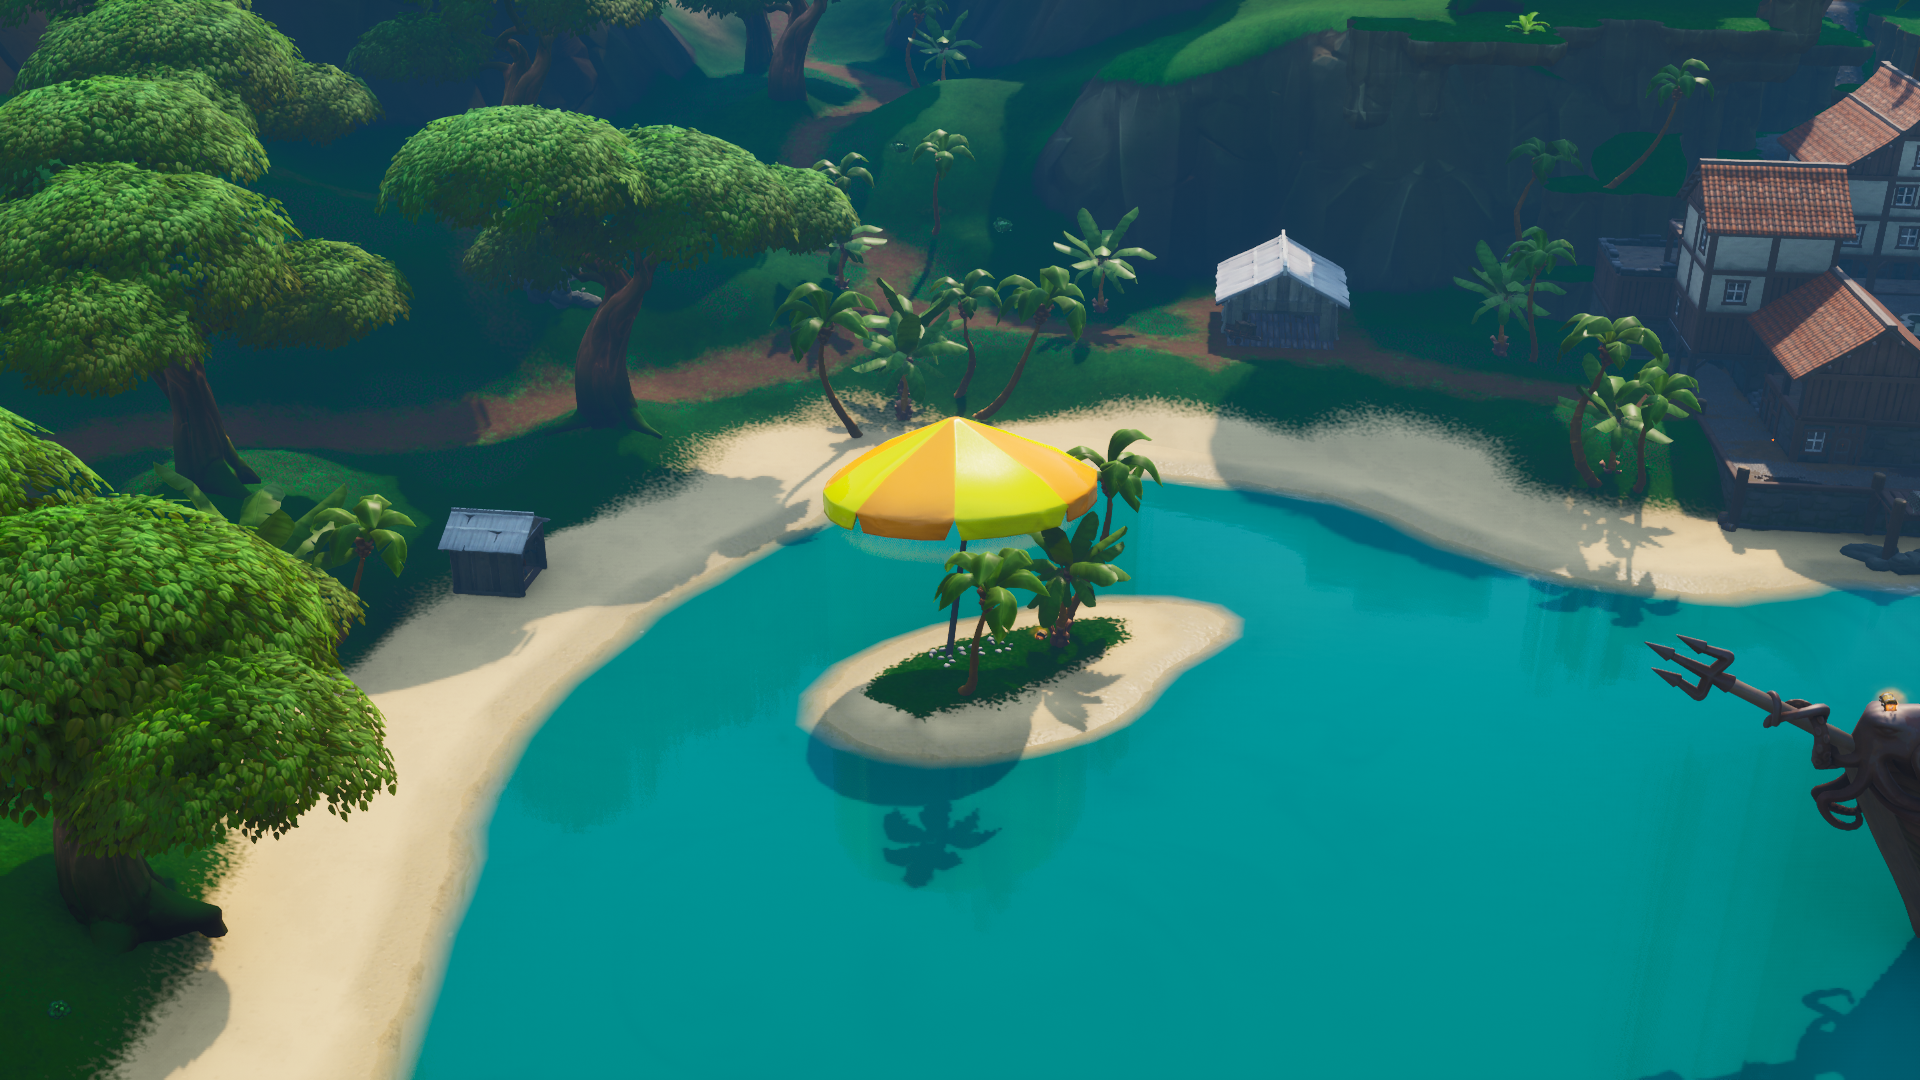 Where to Bounce off of a Giant Beach Umbrella in Fortnite?